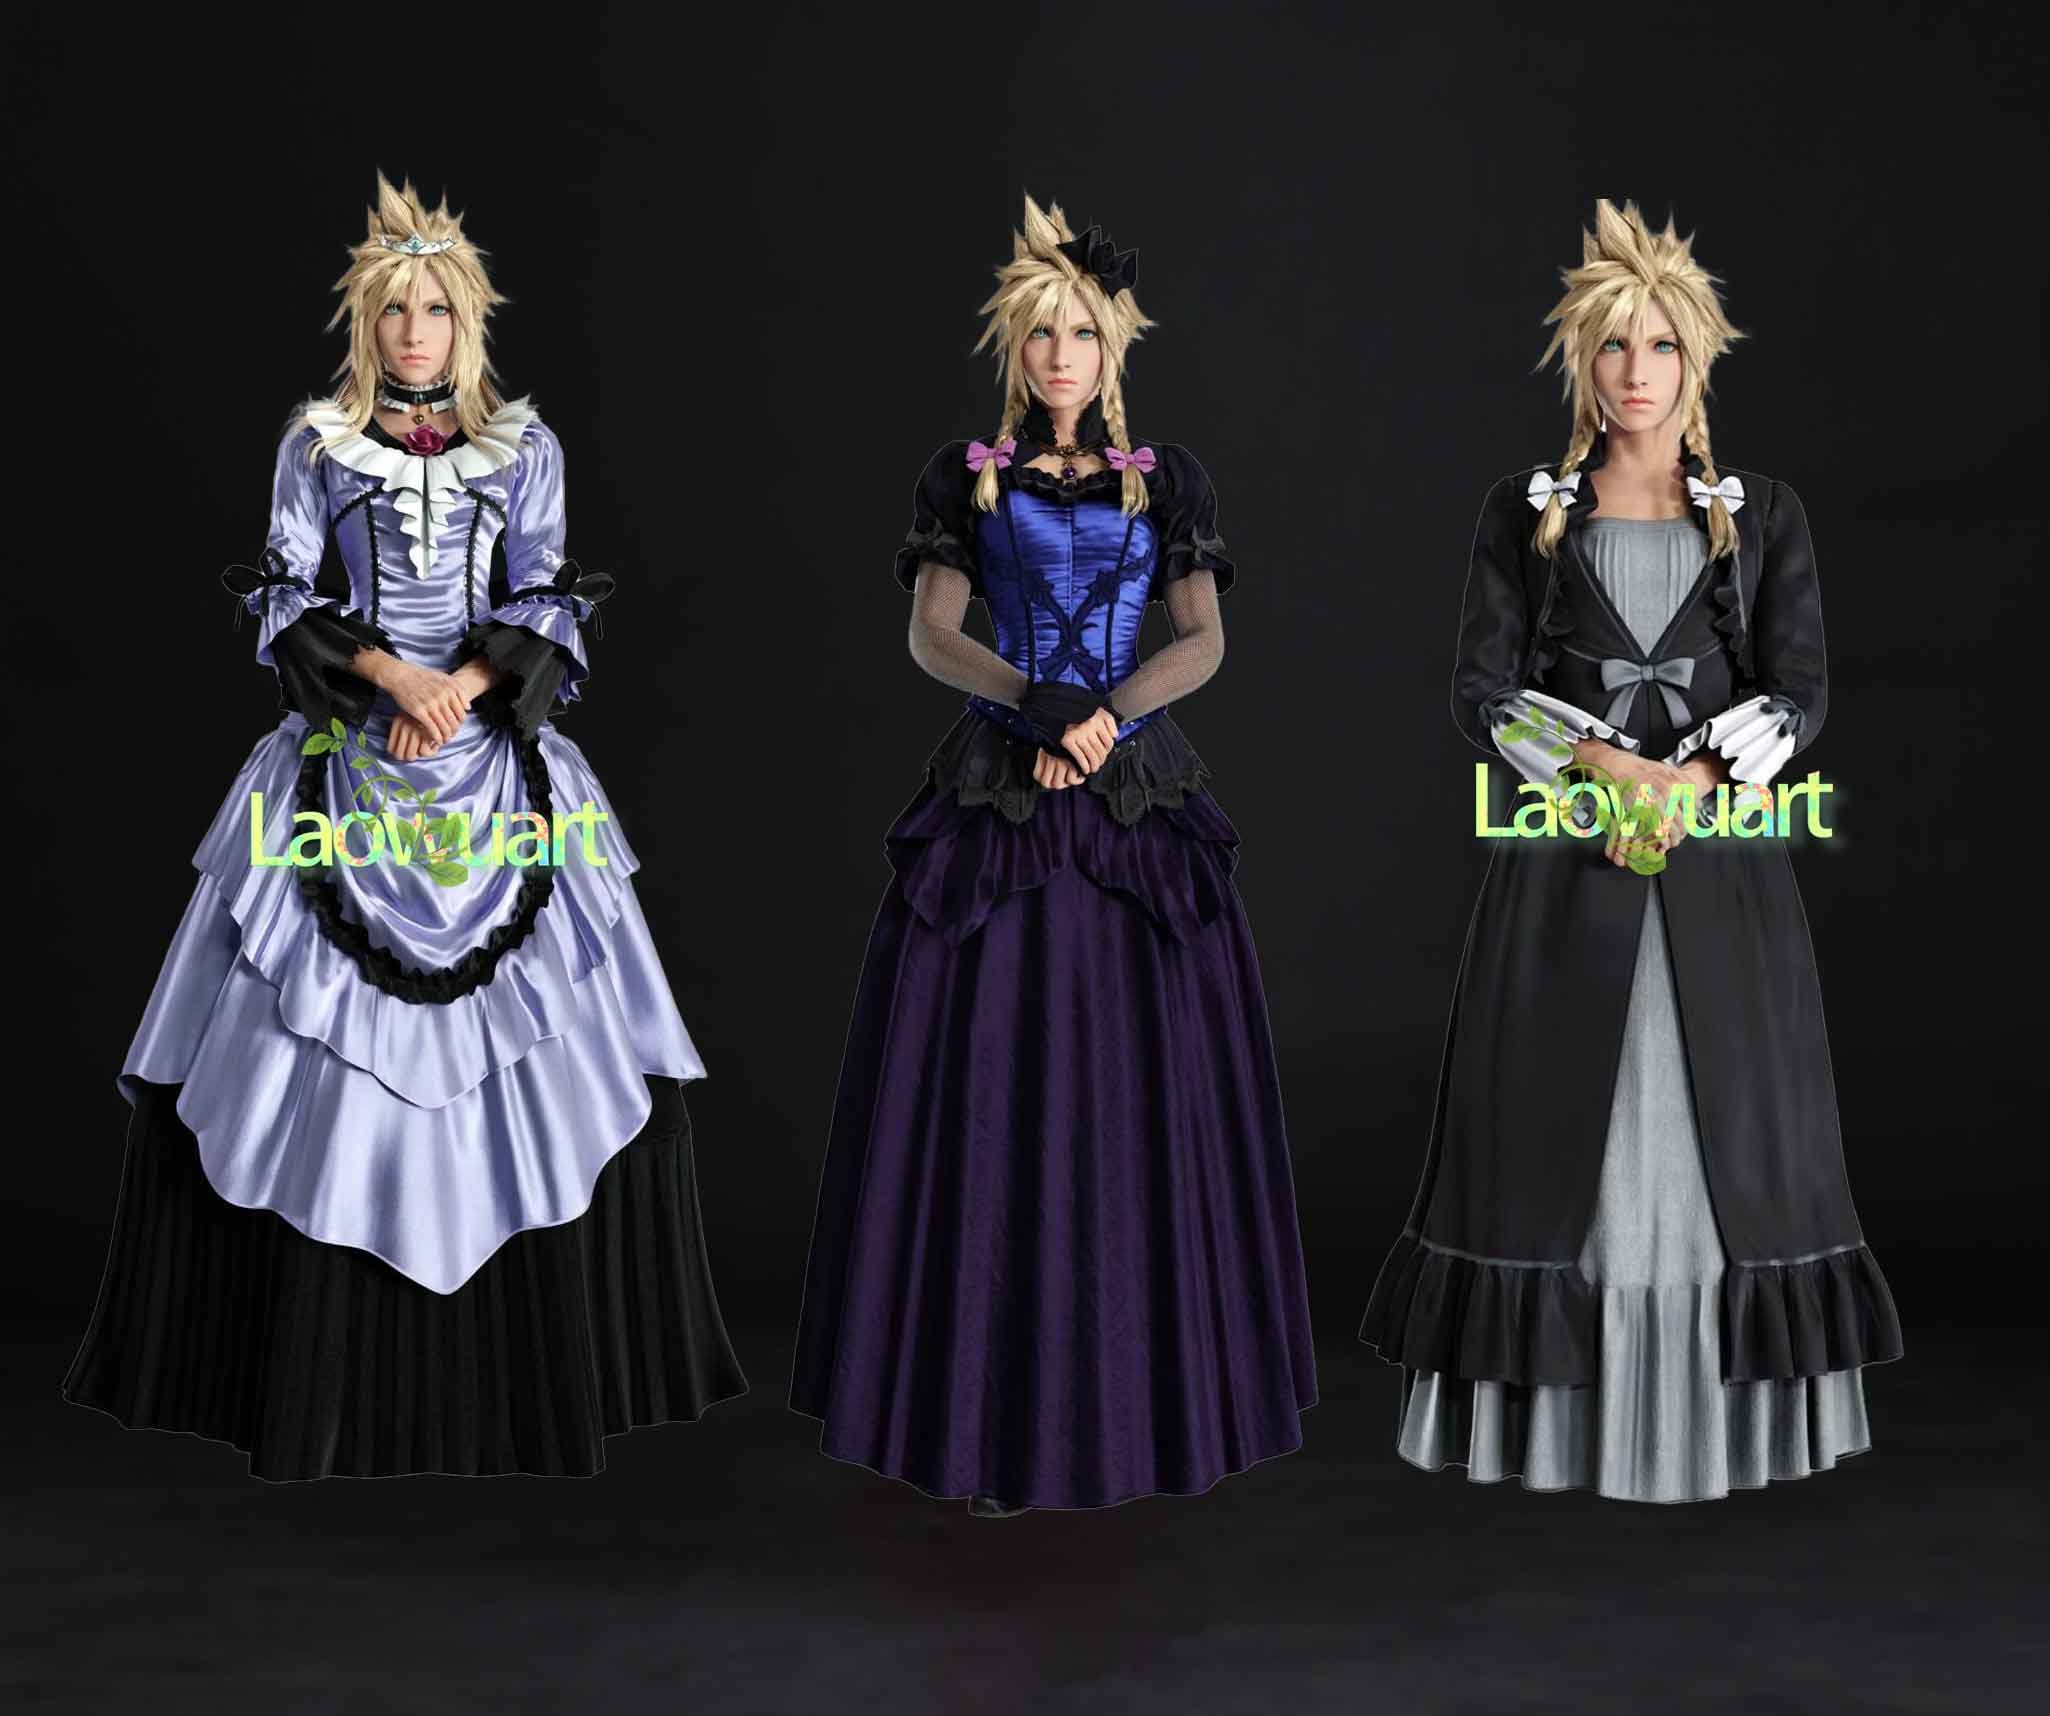 Final Fantasy 7 Dresses: How to get all nine outfits for Cloud